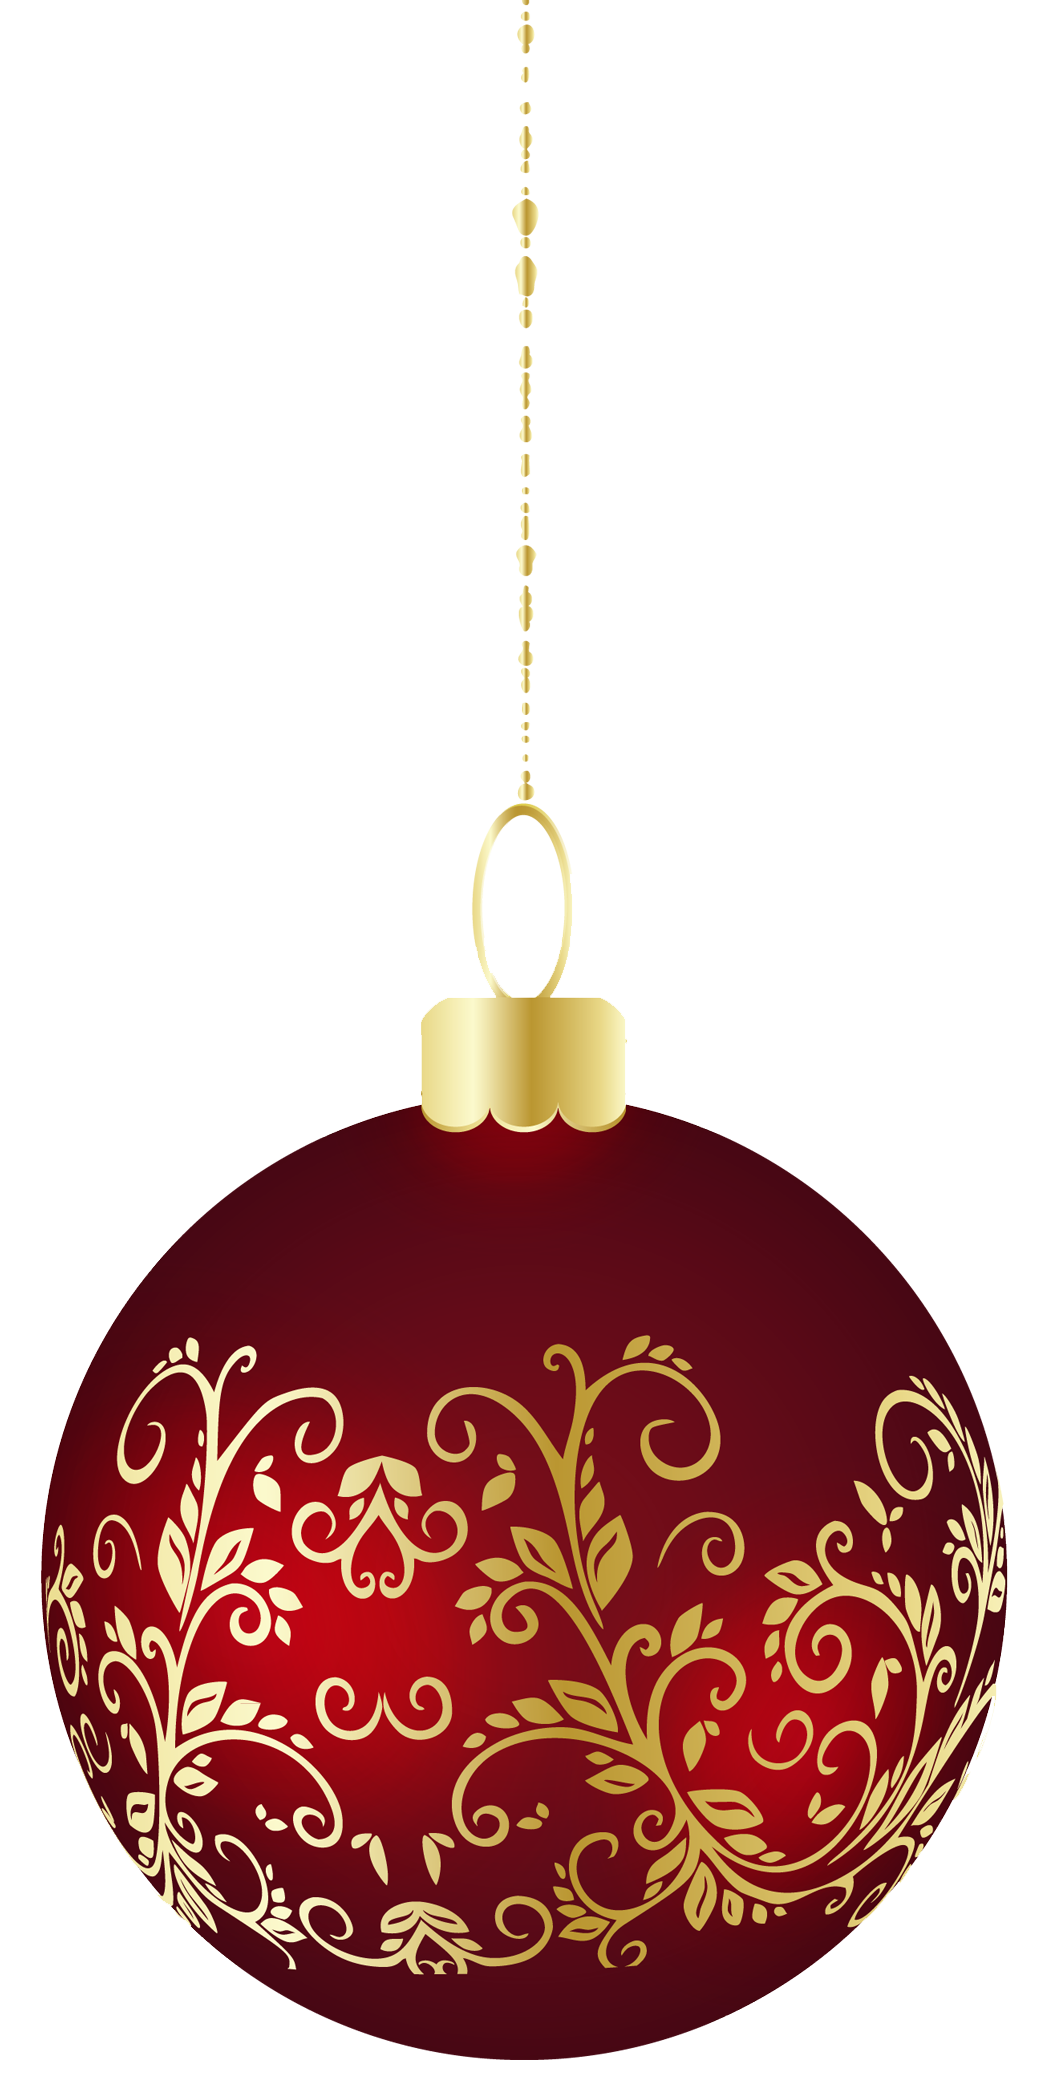 Ornaments Christmas Colorful Free HQ Image PNG Image